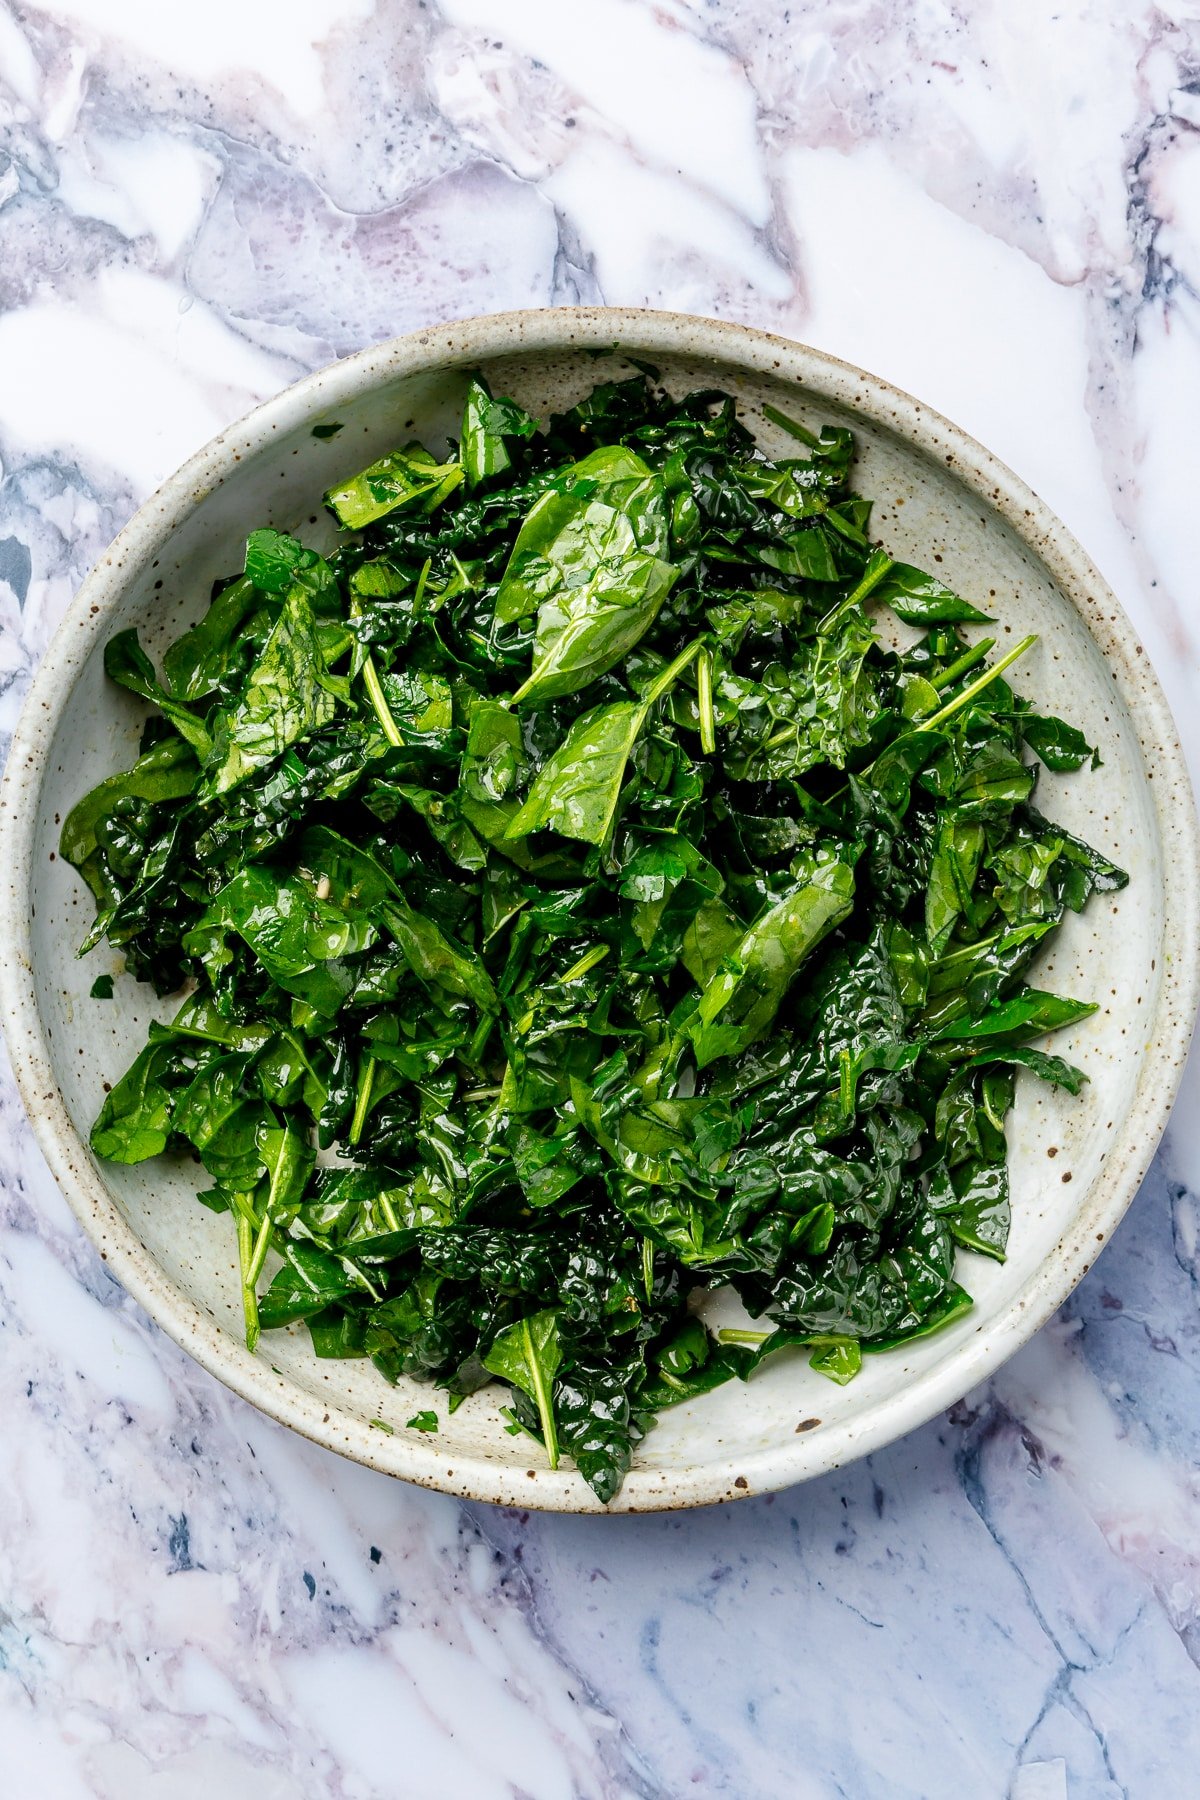 The, now chopped, spinach has been added to the bowl of kale.